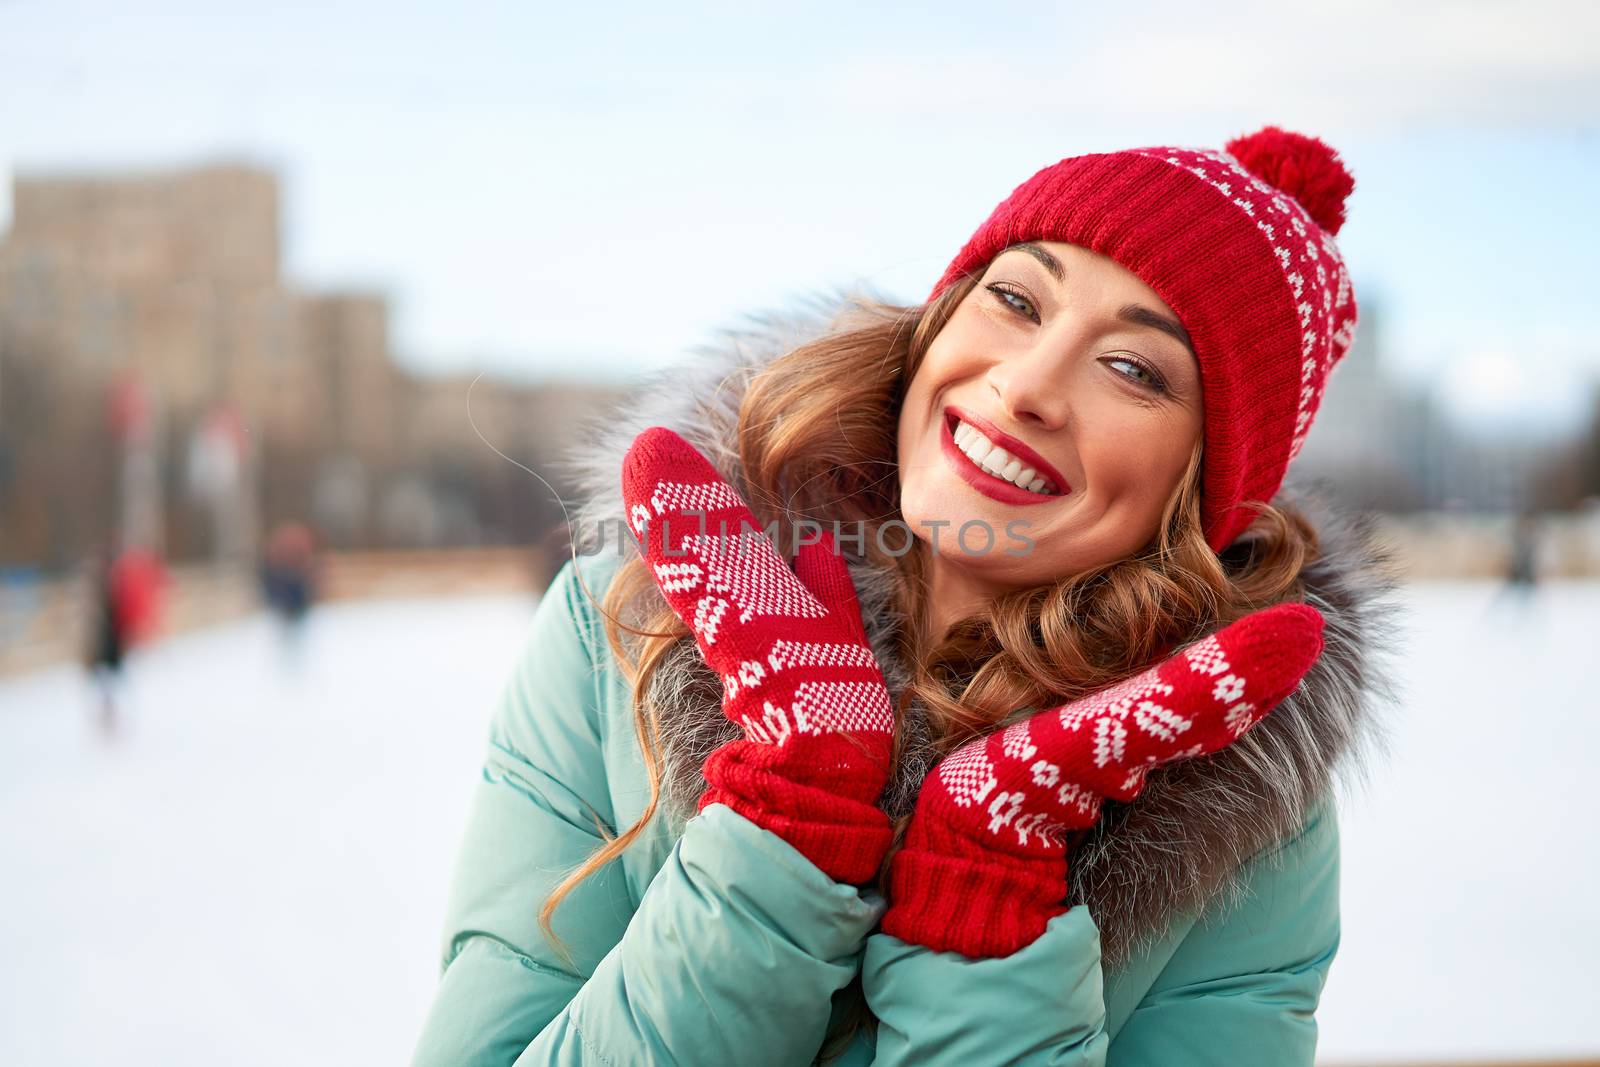 Beautiful lovely middle-aged girl curly hair warm winter jackets red knitted hat glove stands ice rink background Town Square Christmas mood lifestyle Happy holiday woman snowy day Winter leisure